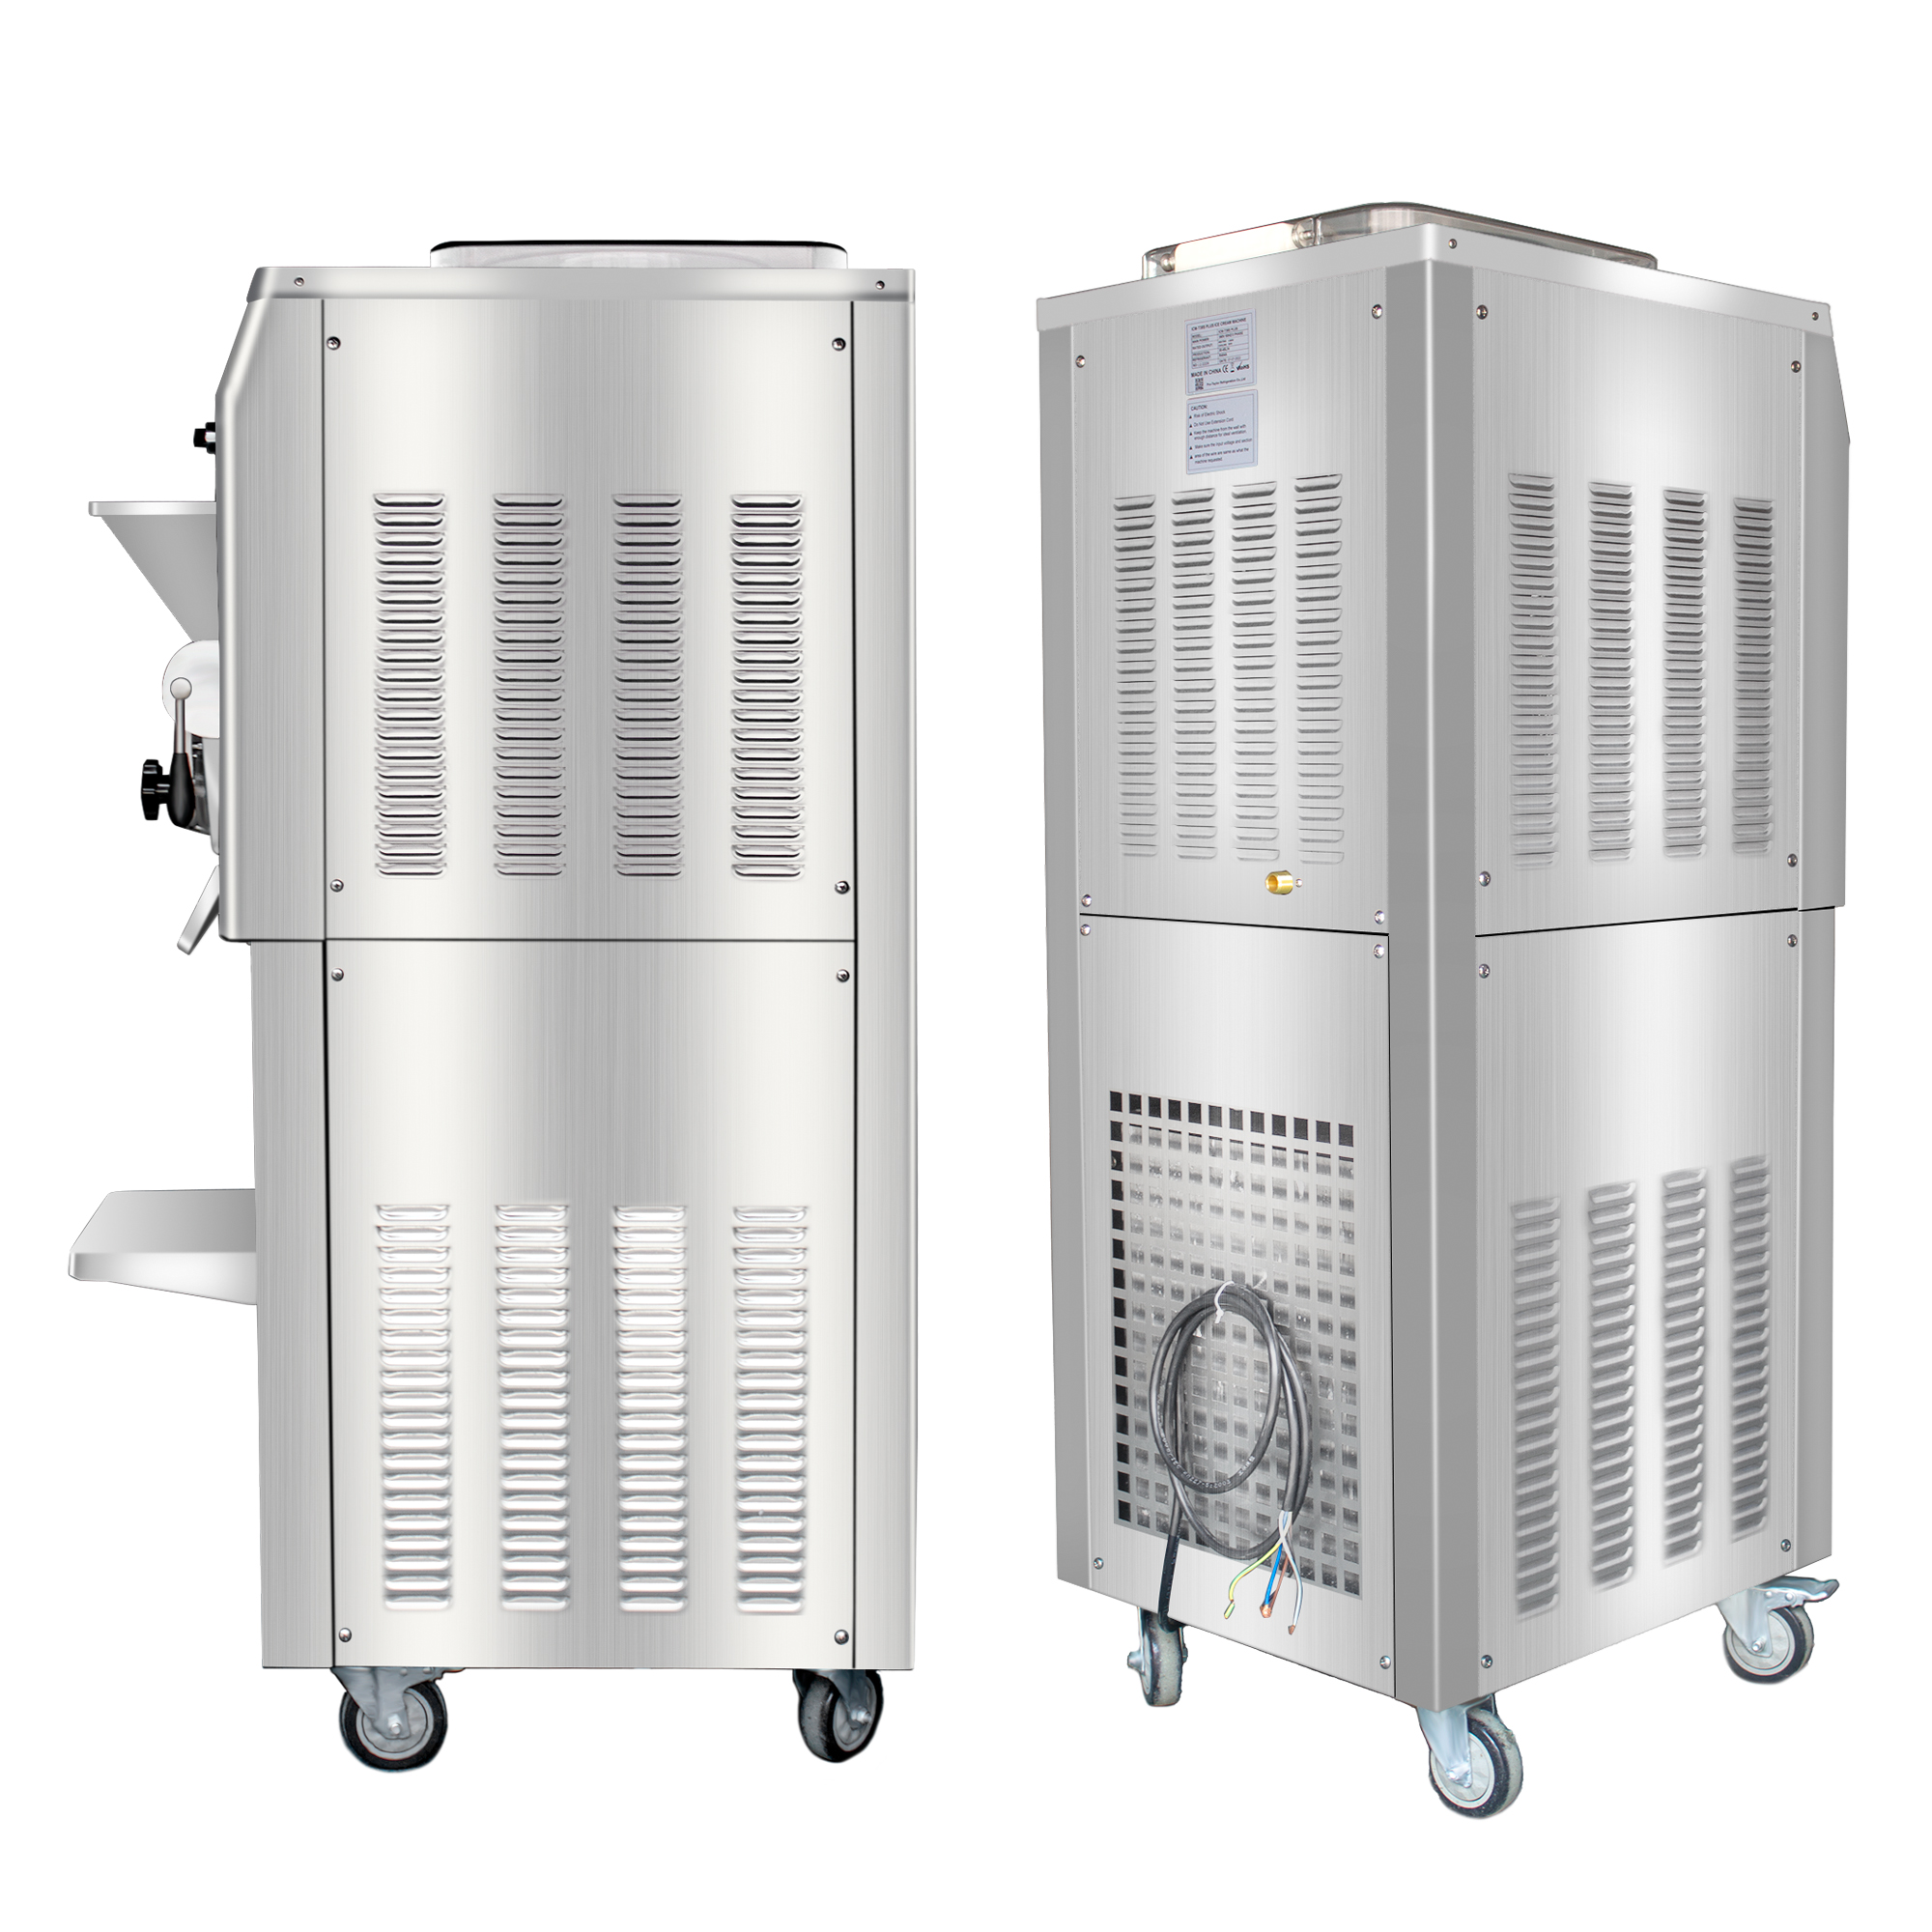 Multi-functional ice cream freezer with pasteurization